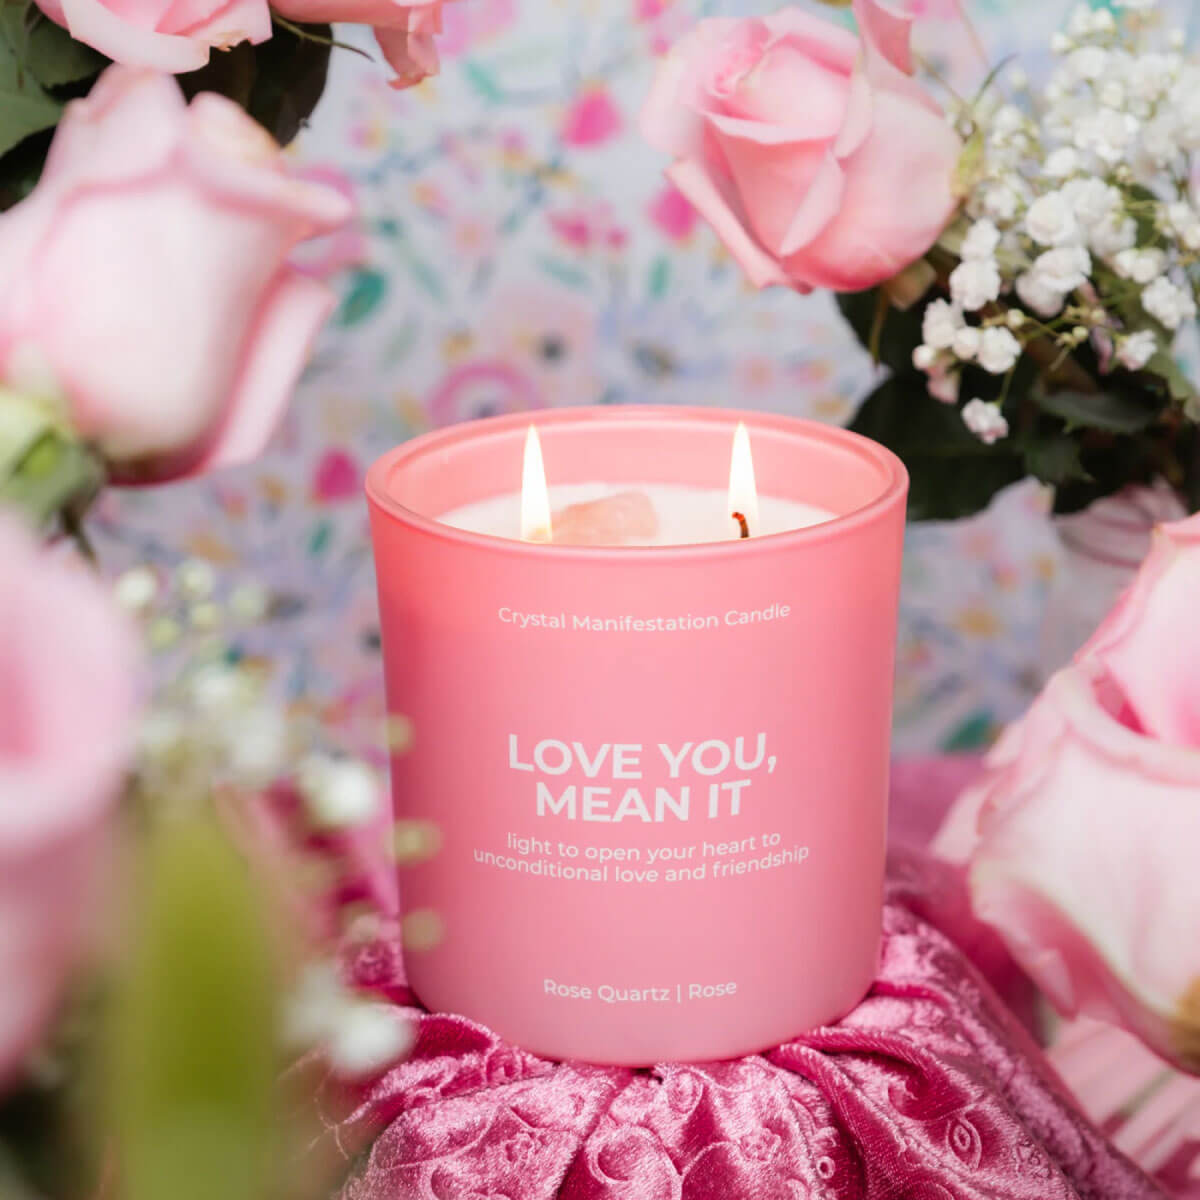 Jill & Ally Love You, Mean It Crystal Manifestation Candle pink front | MILK MONEY cute candle, gifts